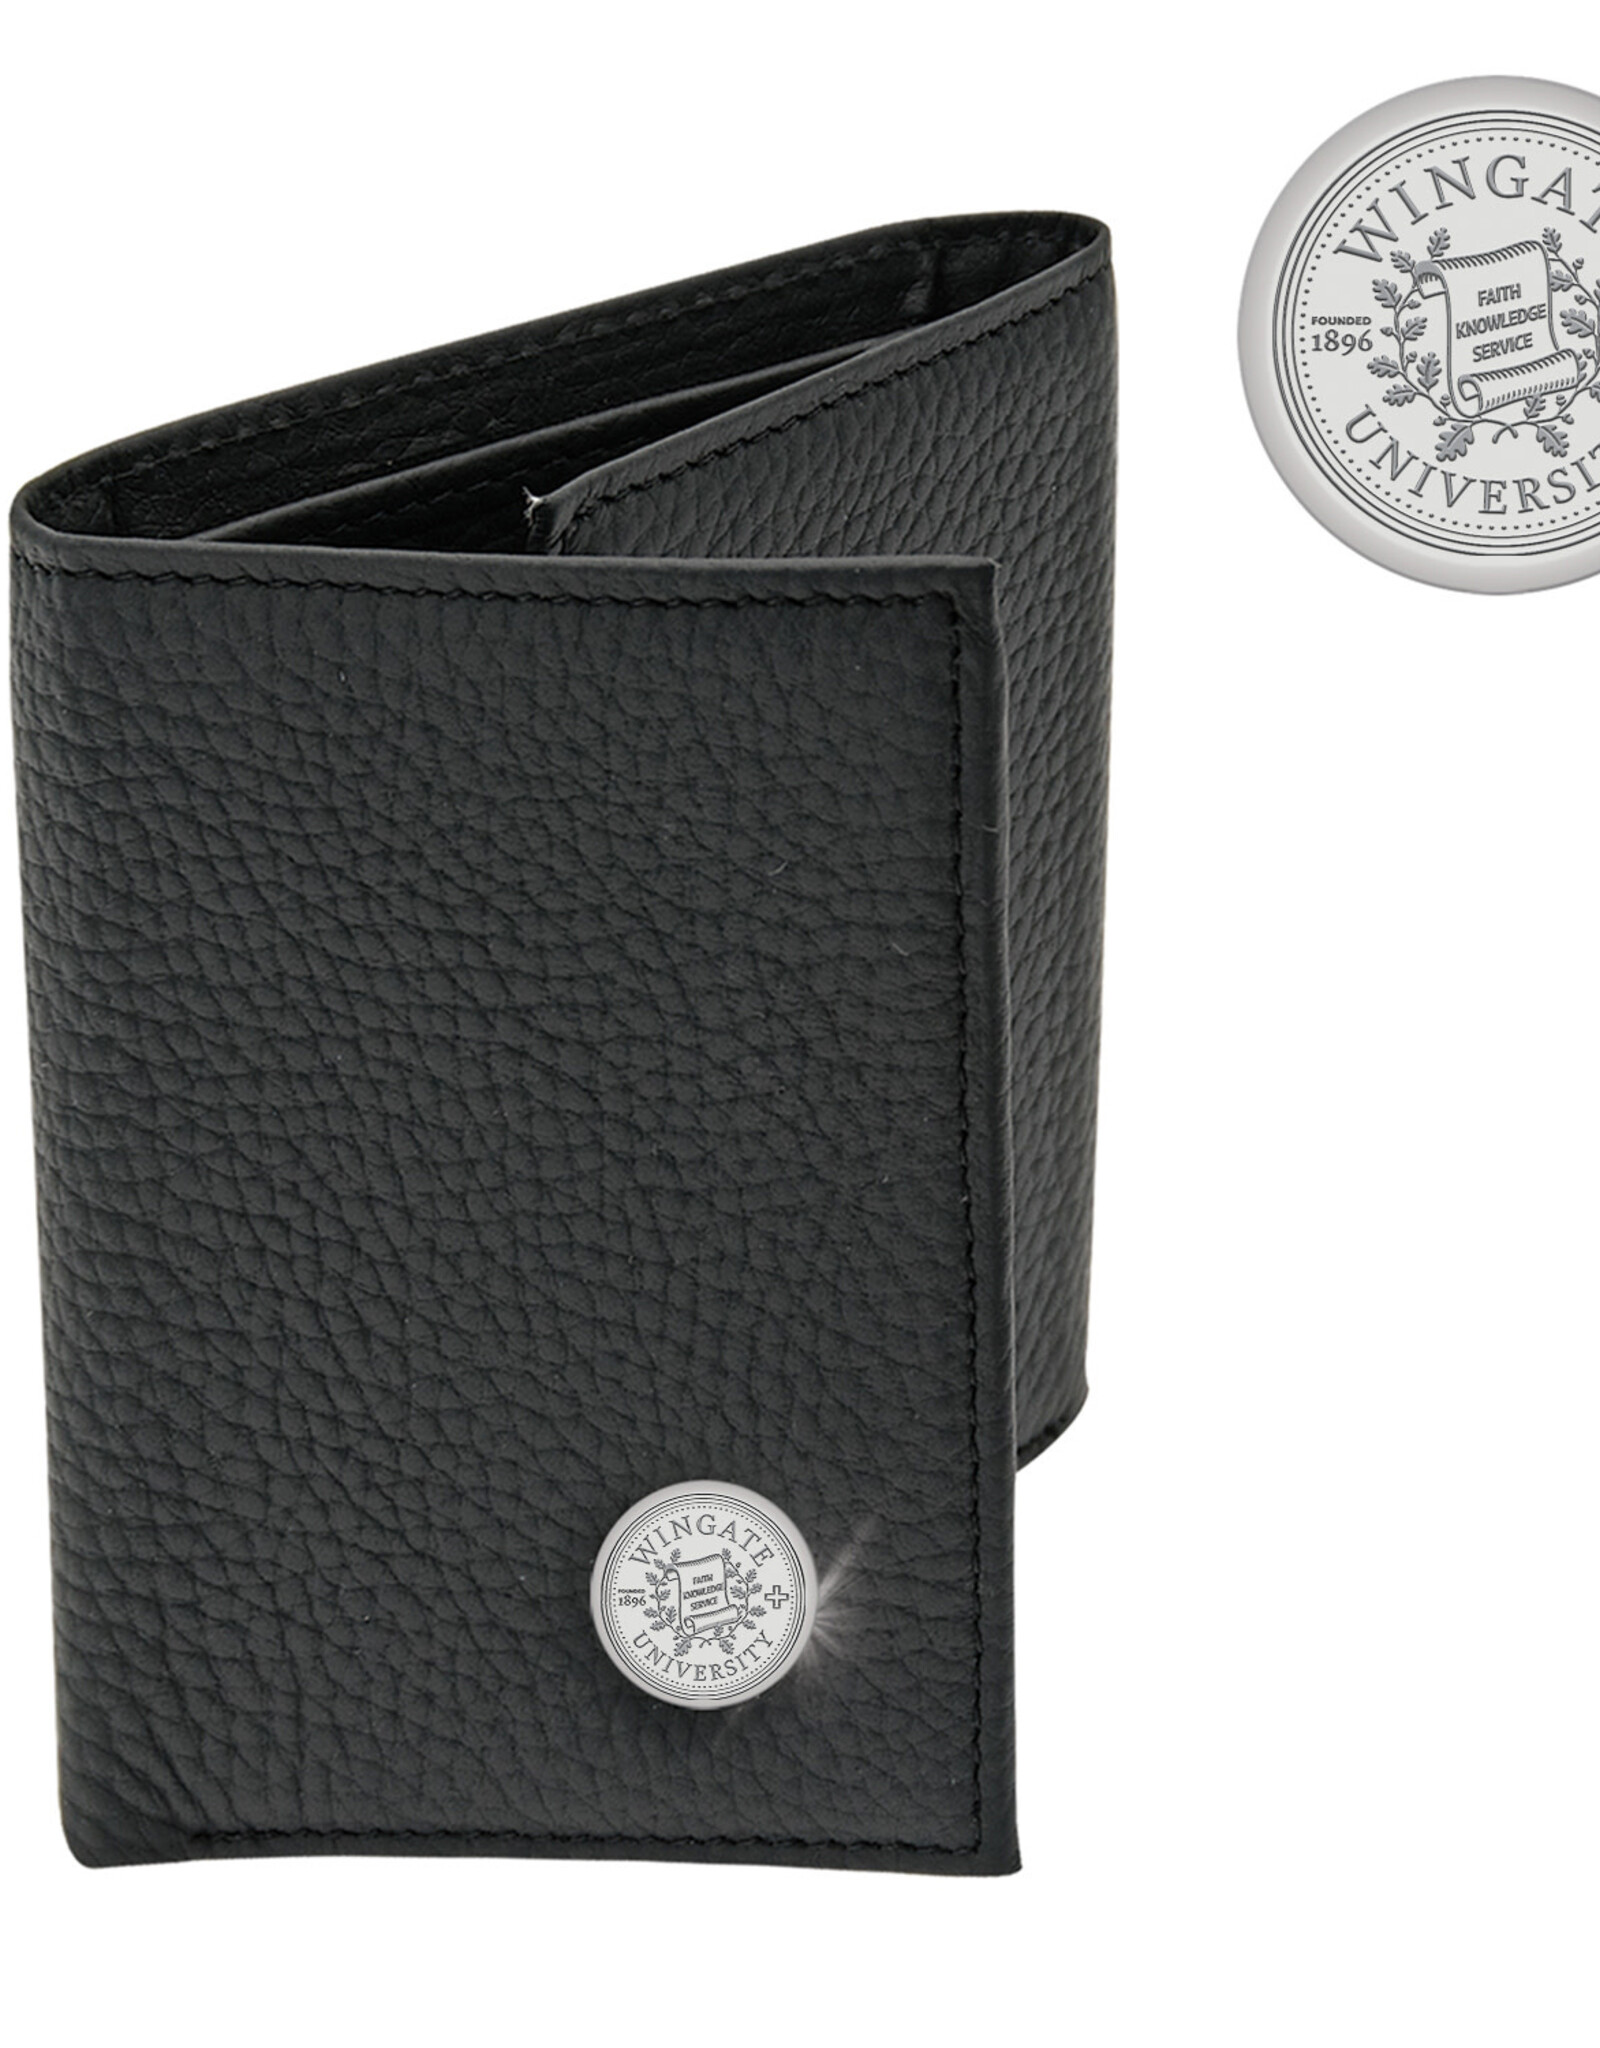 DROP SHIP ONLY Mens Black Leather Trifold Wallet with silver Wingate University Seal (ONLINE ONLY)